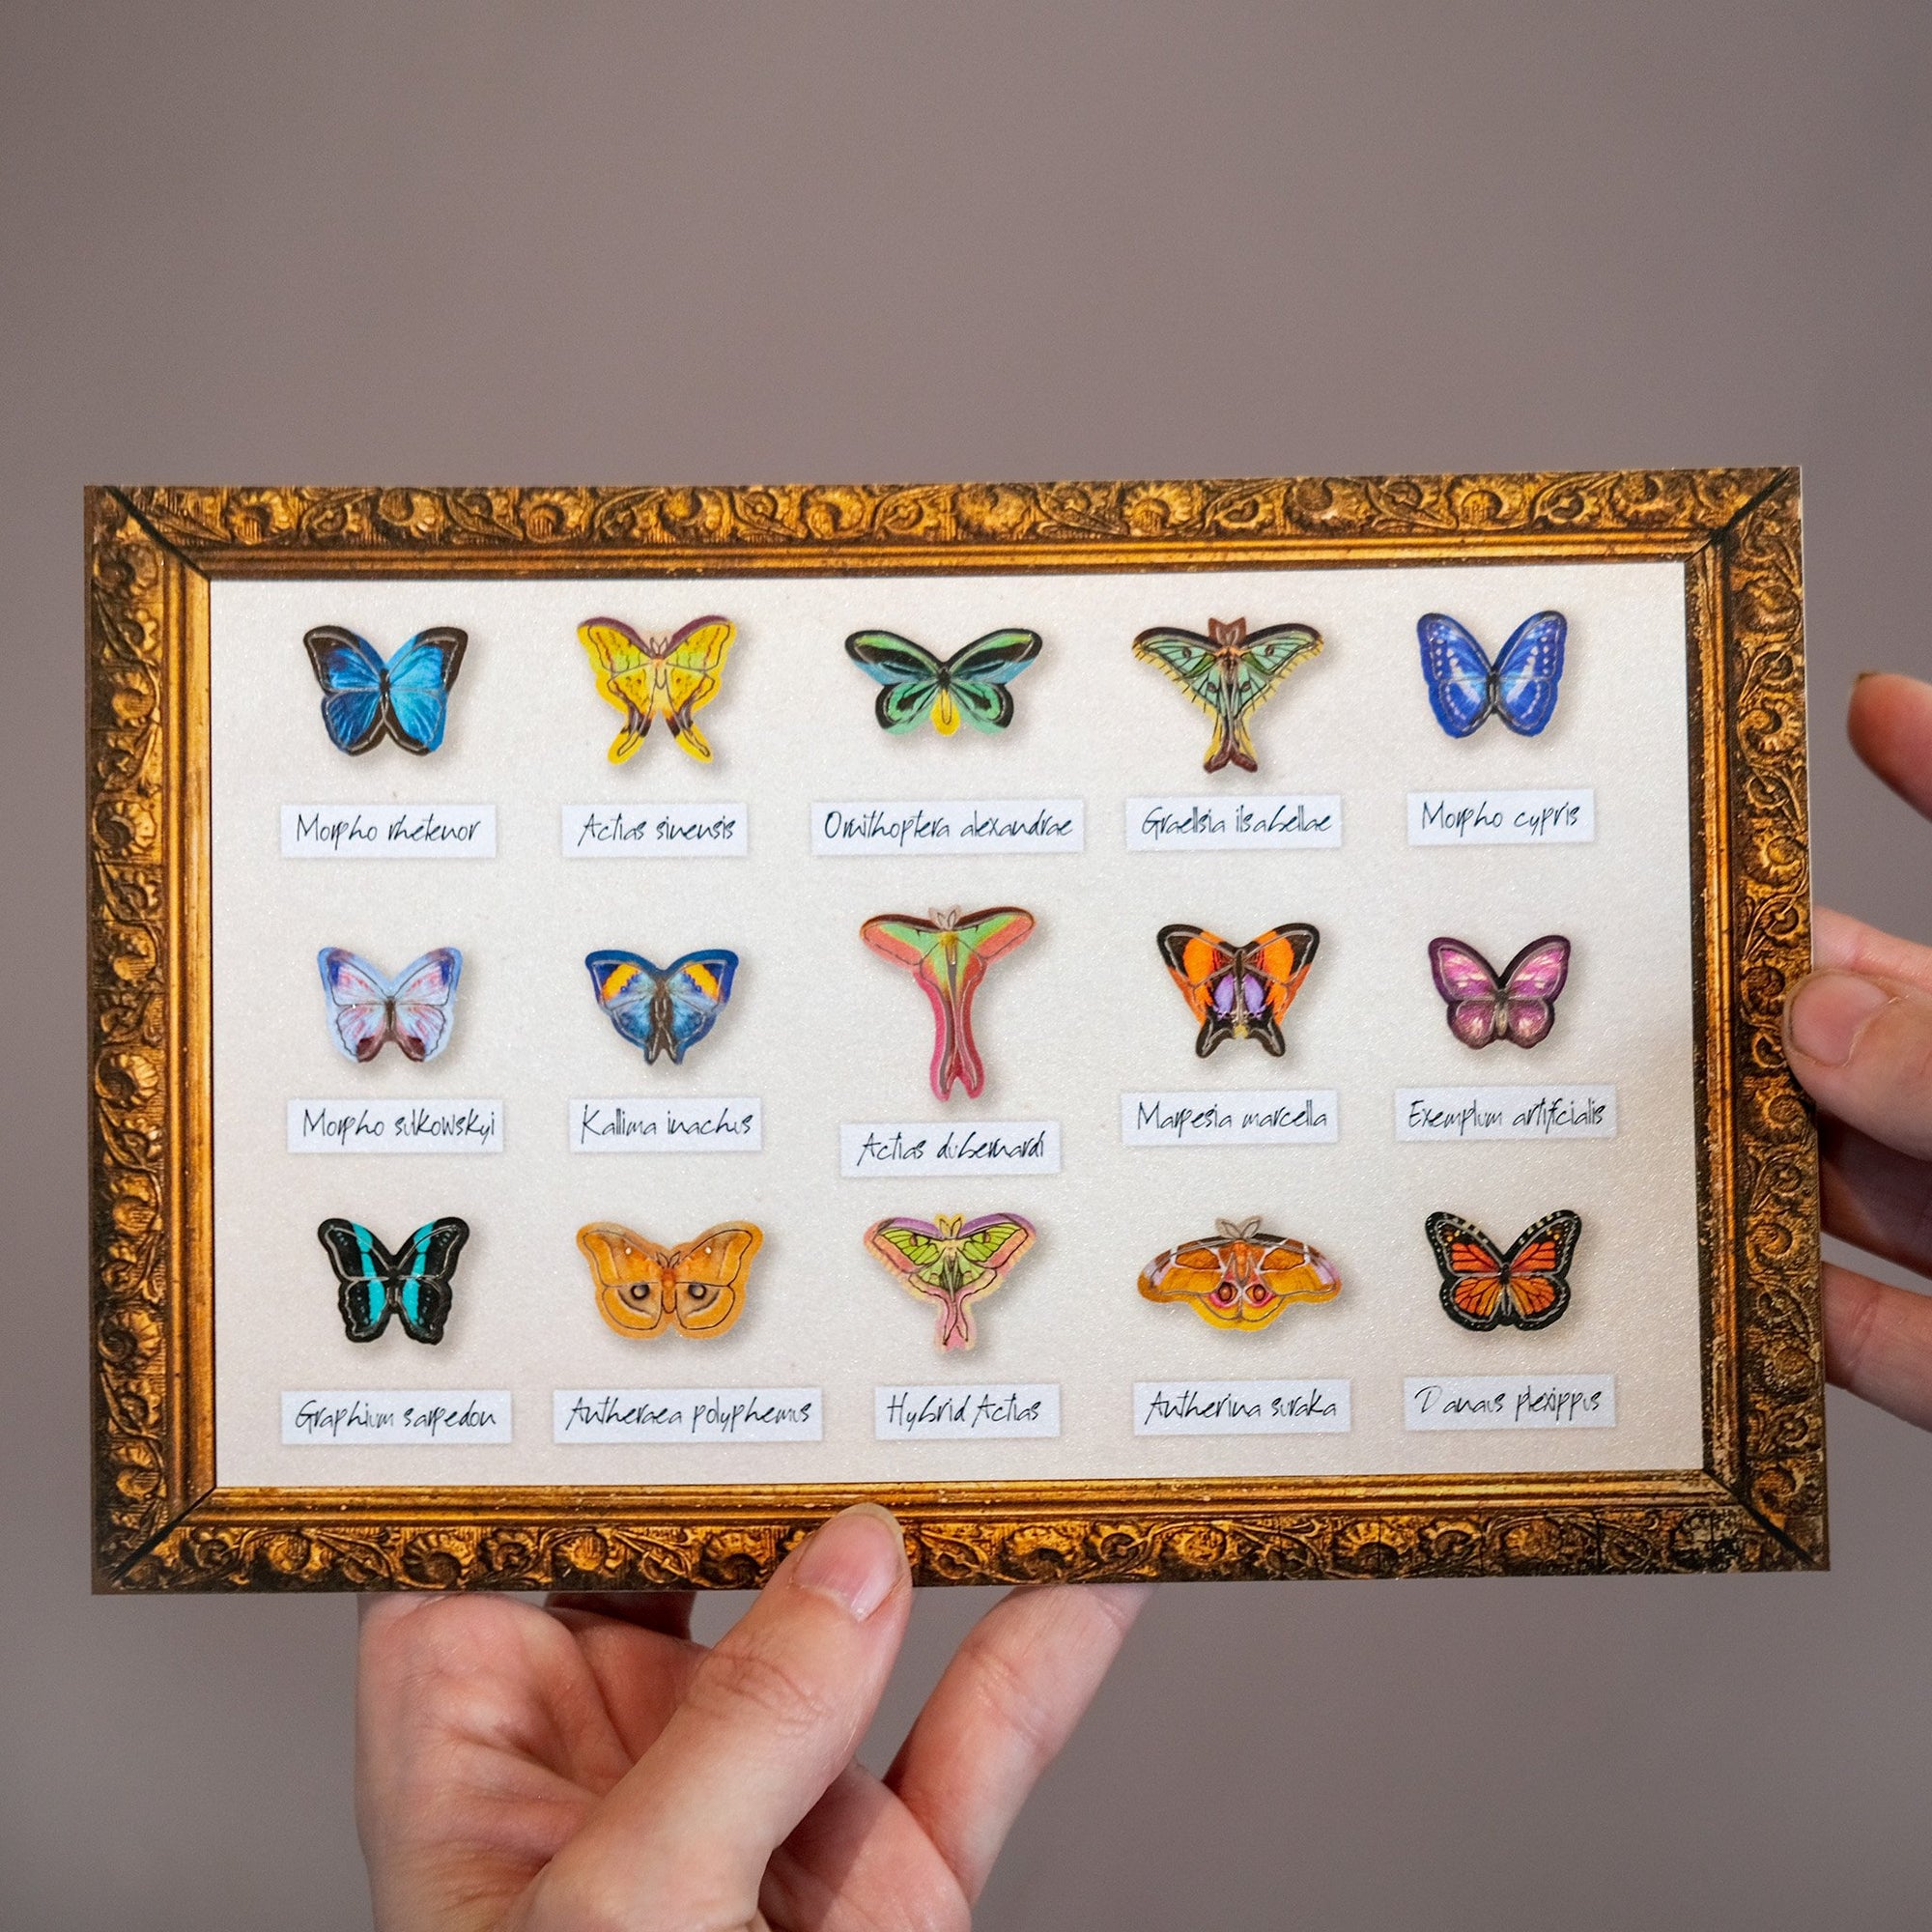 ’Tulip' Micro Moth & Butterfly Collection Artist Wholesale